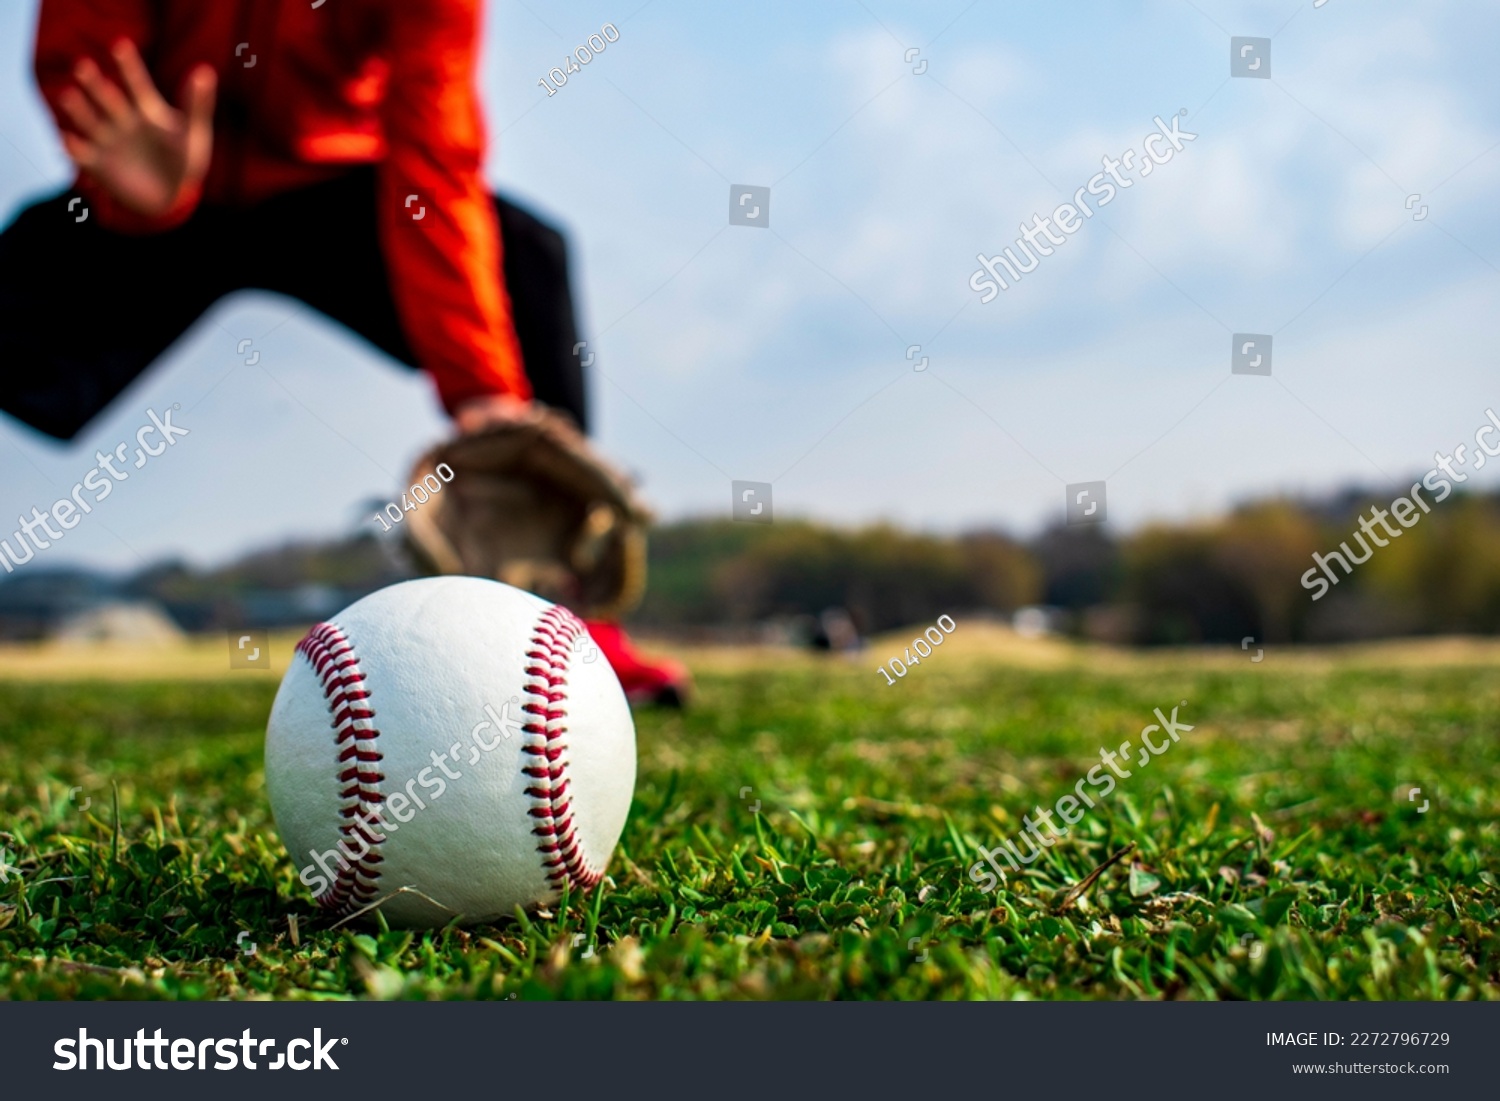 Baseball ball on the lawn. Man in catching position in background. #2272796729